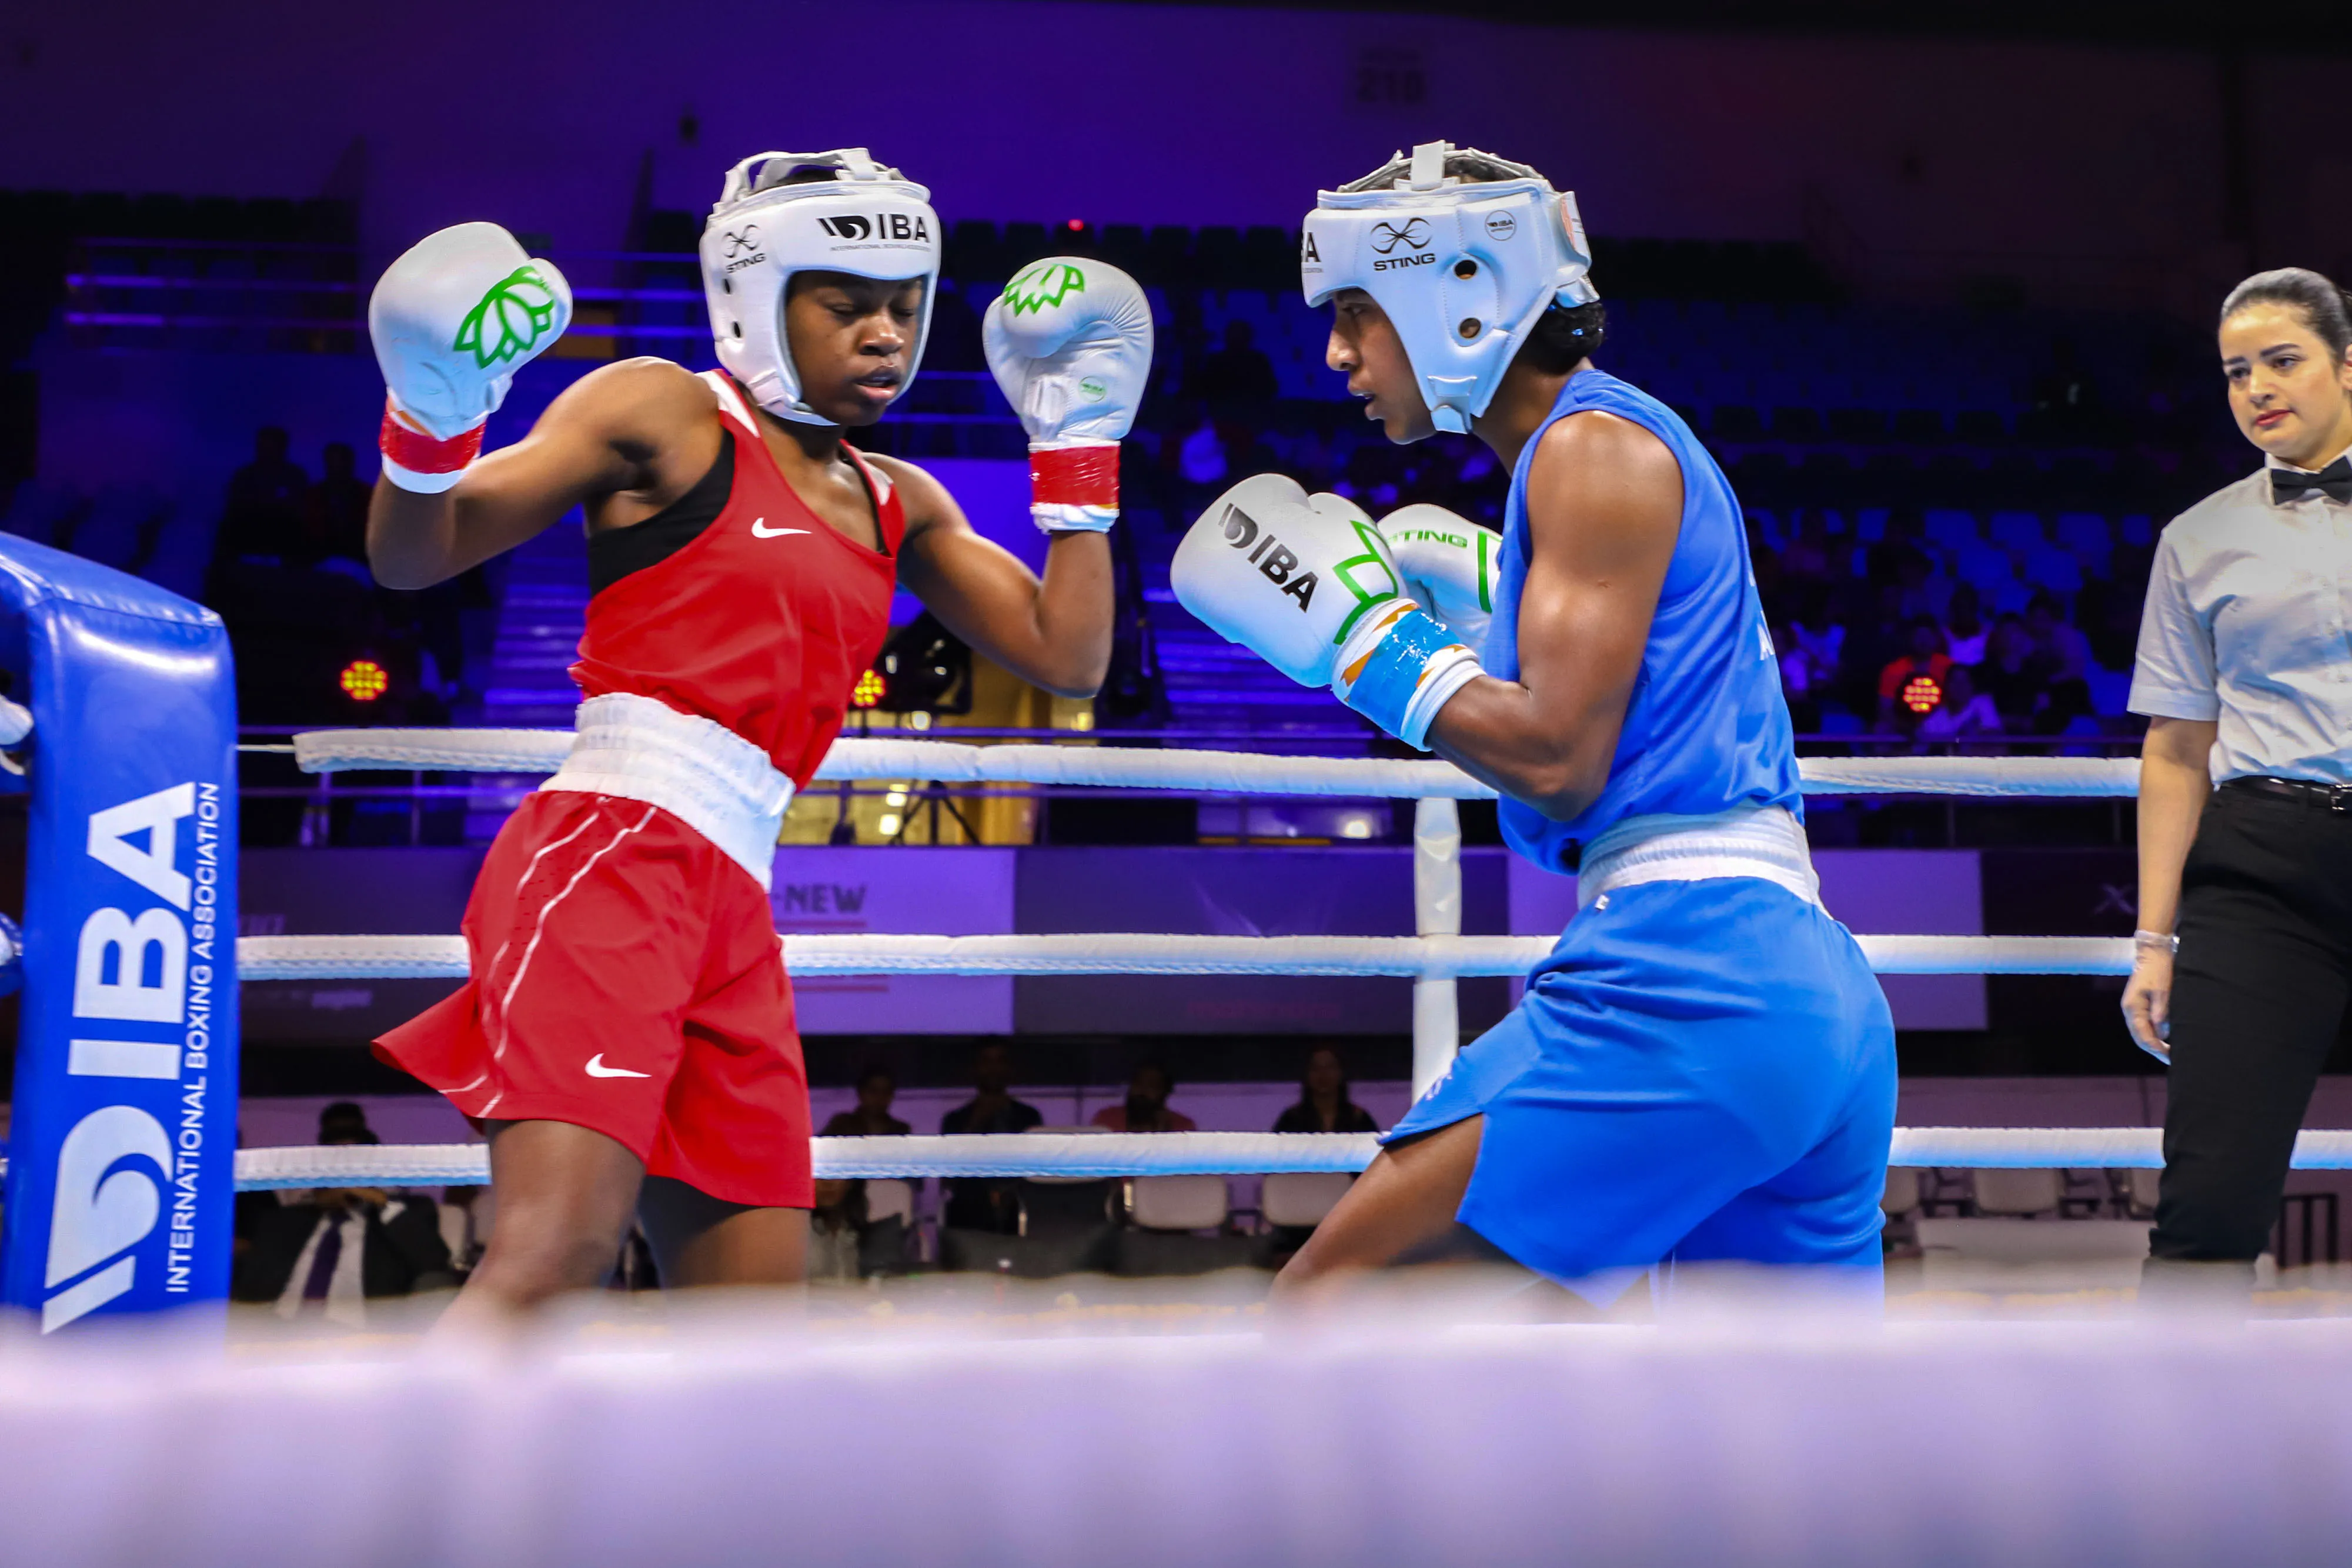 IBA World Boxing Championships | Nepal out to make a statement with no burden of expectations 